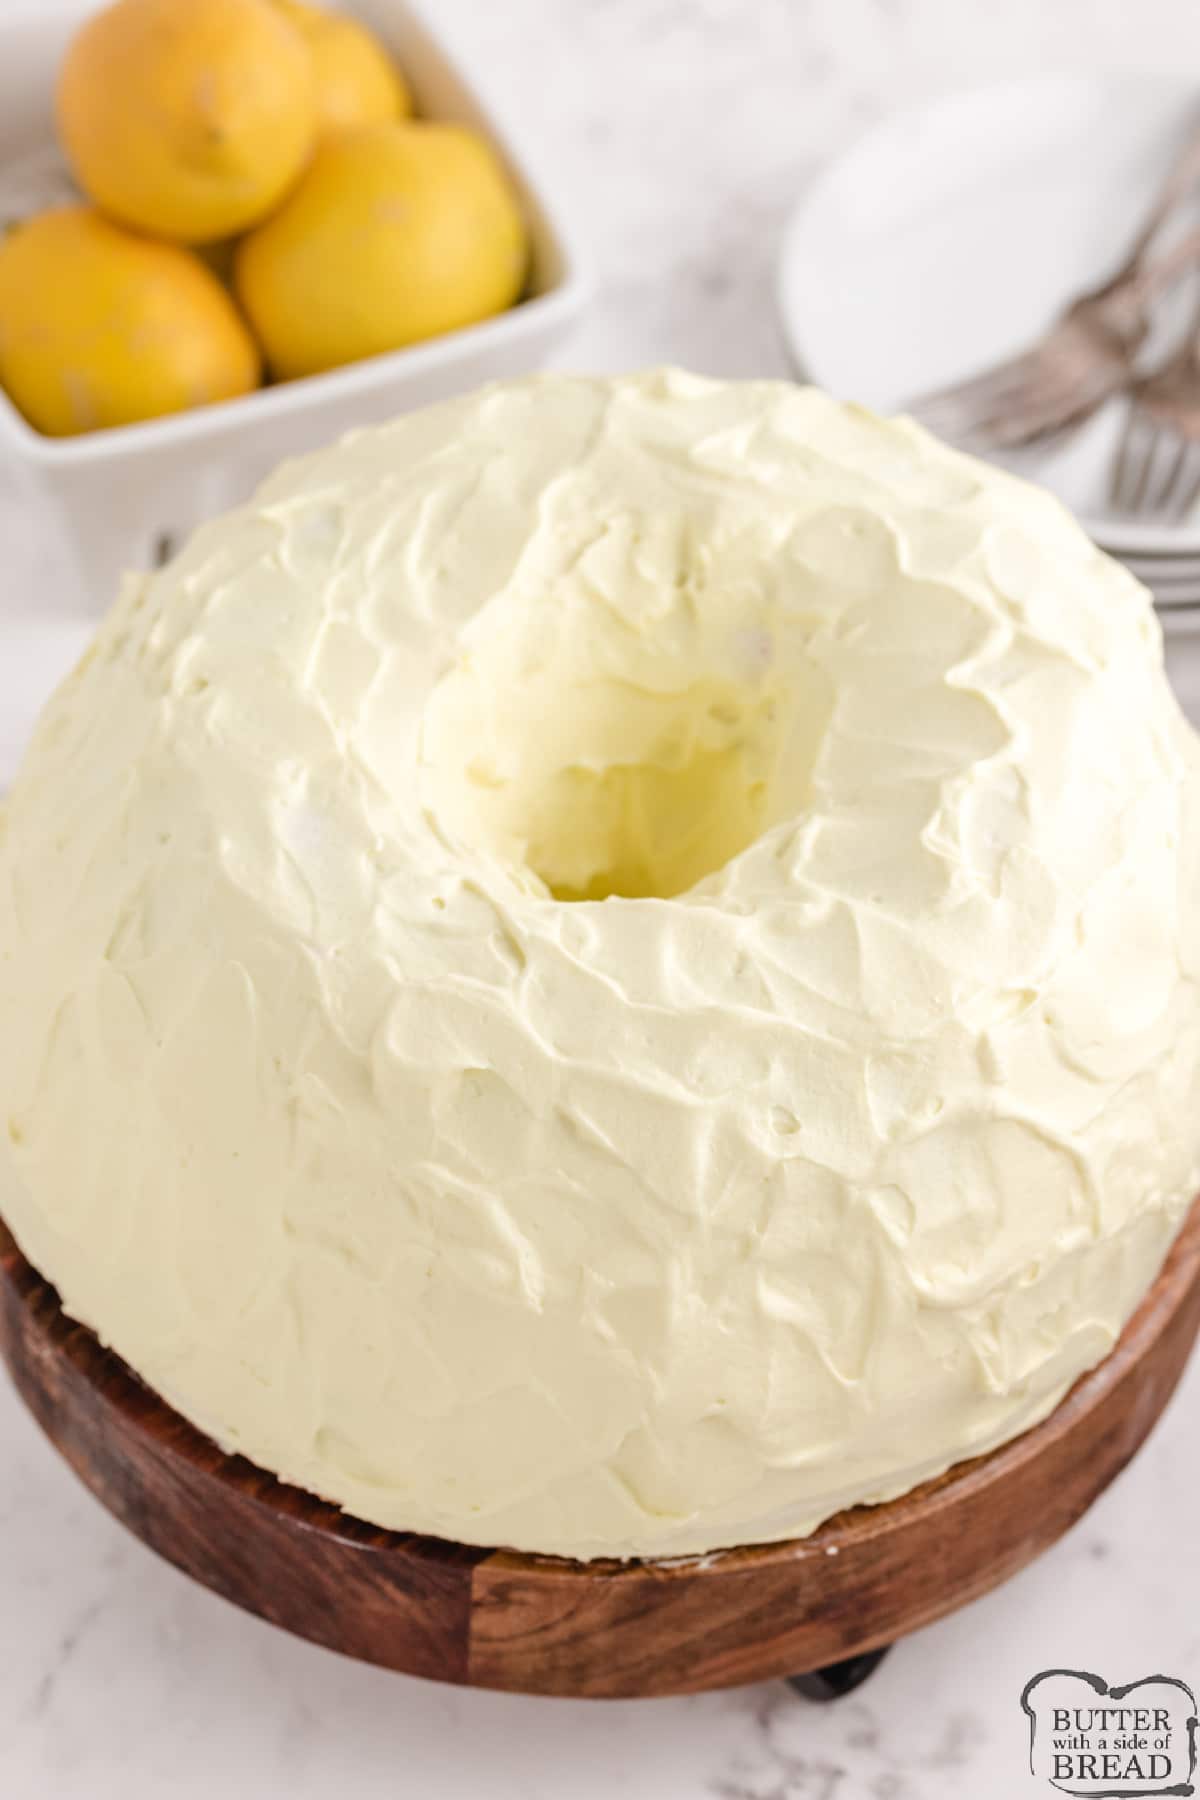 ayered Lemon Chiffon Cake is a light, refreshing dessert. Three layers of cake (made completely from scratch!) with lemon pie filling in between are all topped with a creamy, lemon whipped cream.